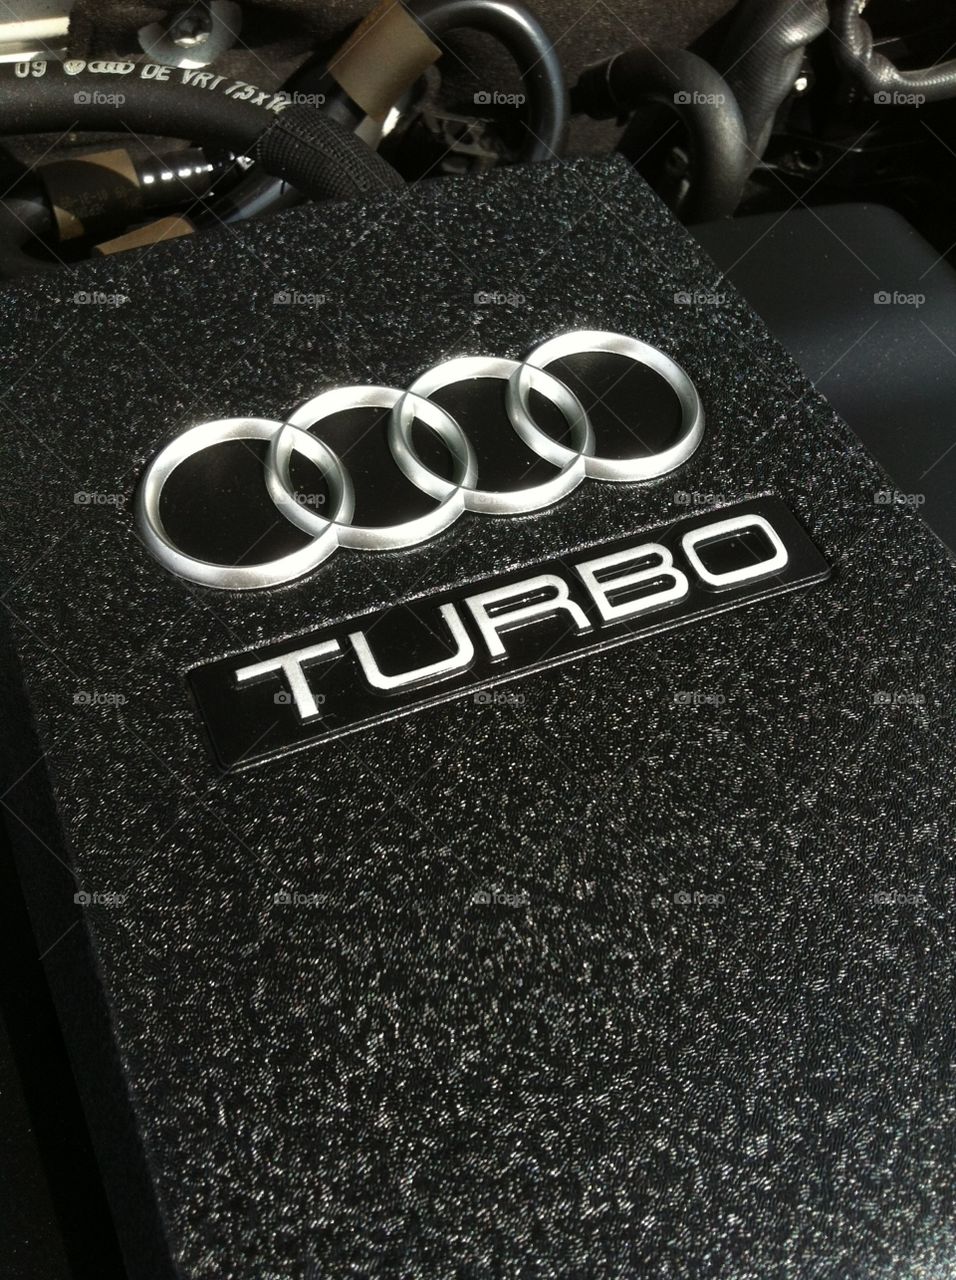 Audi turbo. A picture of my Audi A6 motor.